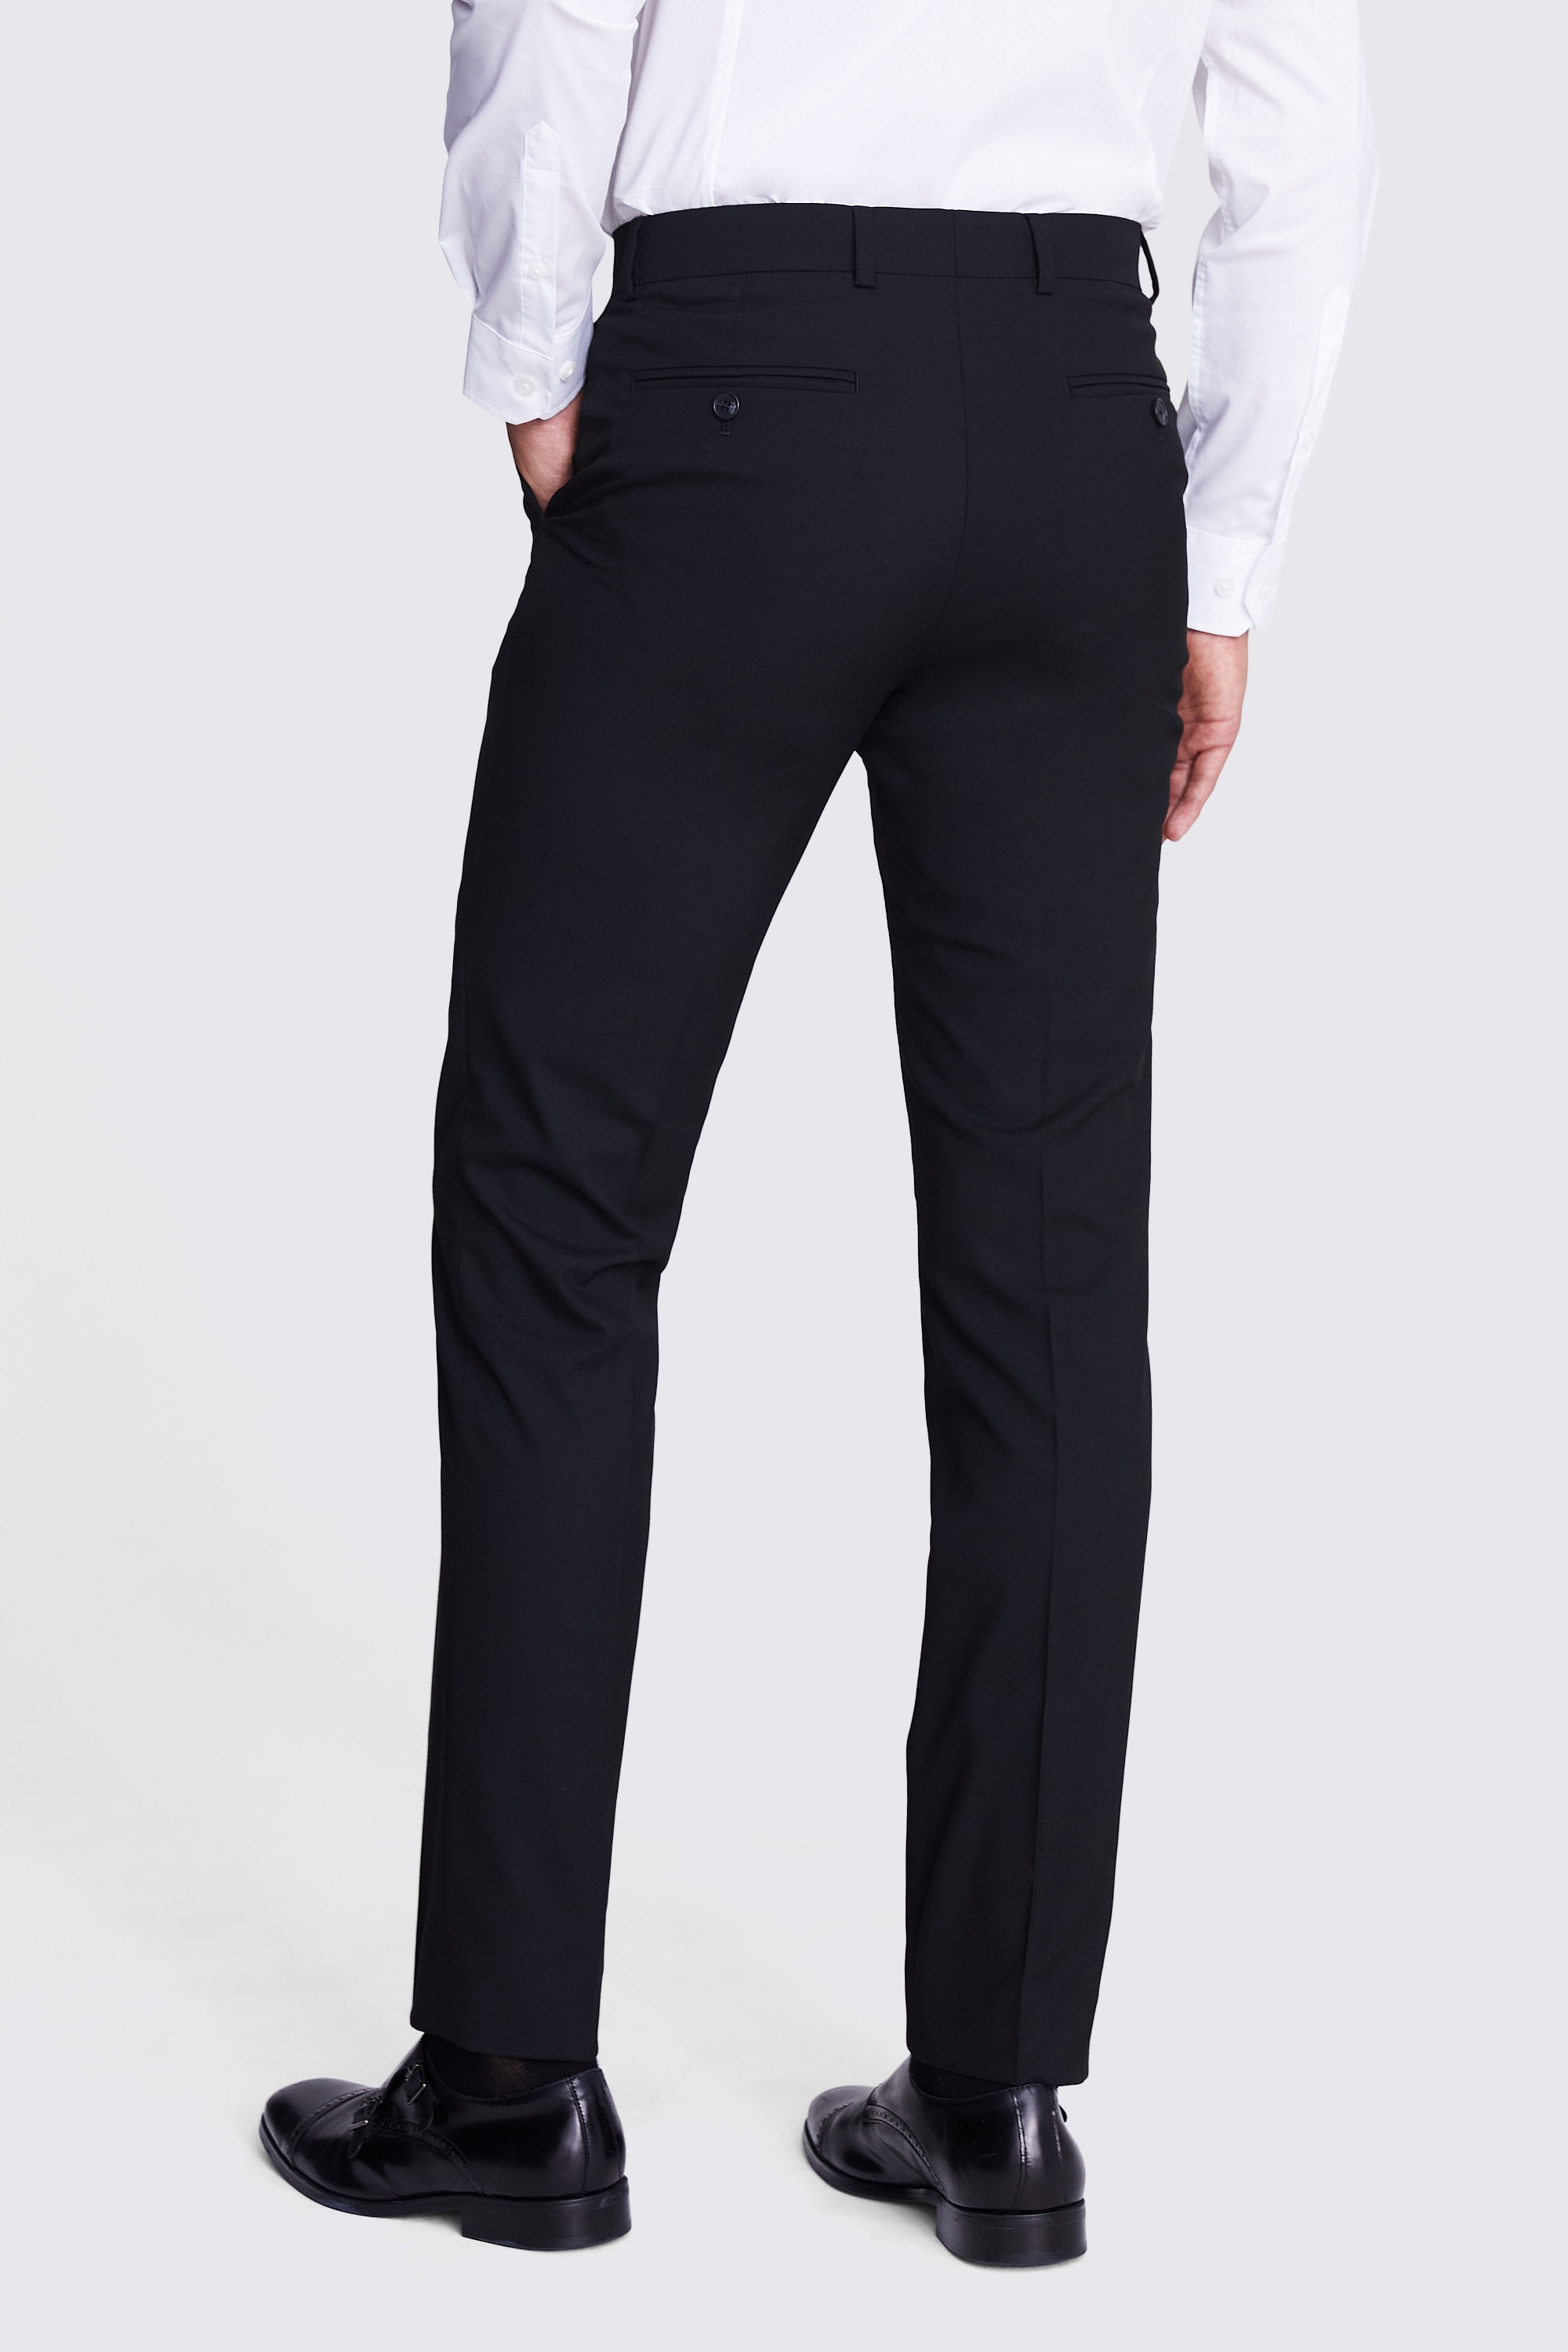 Tailored Fit Black Trousers | Buy Online at Moss